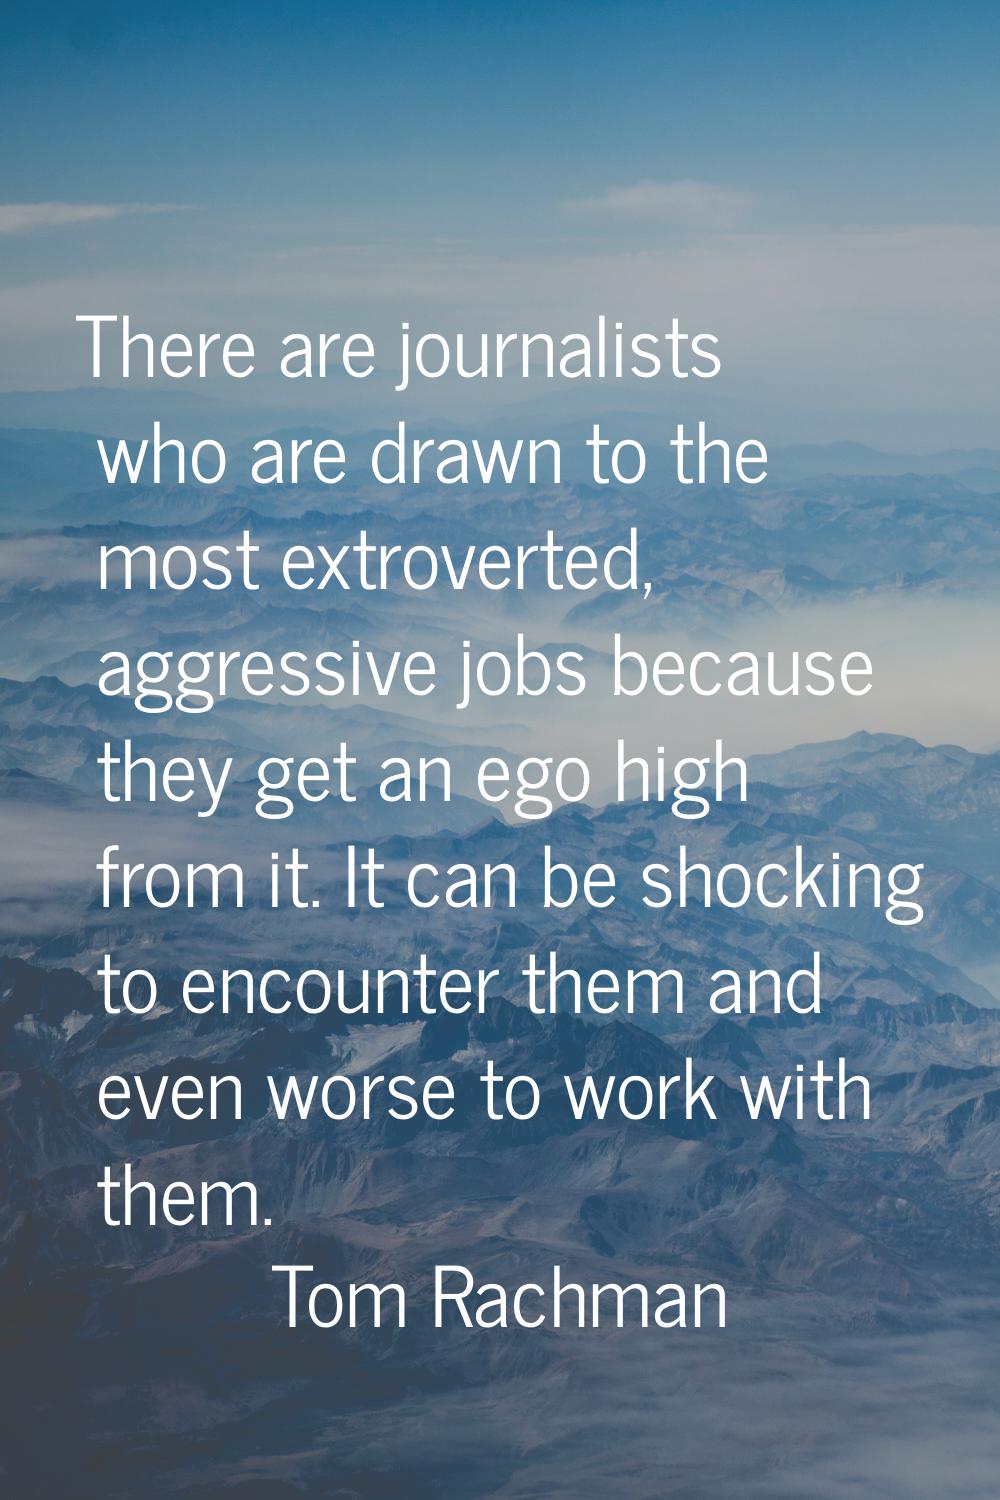 There are journalists who are drawn to the most extroverted, aggressive jobs because they get an eg